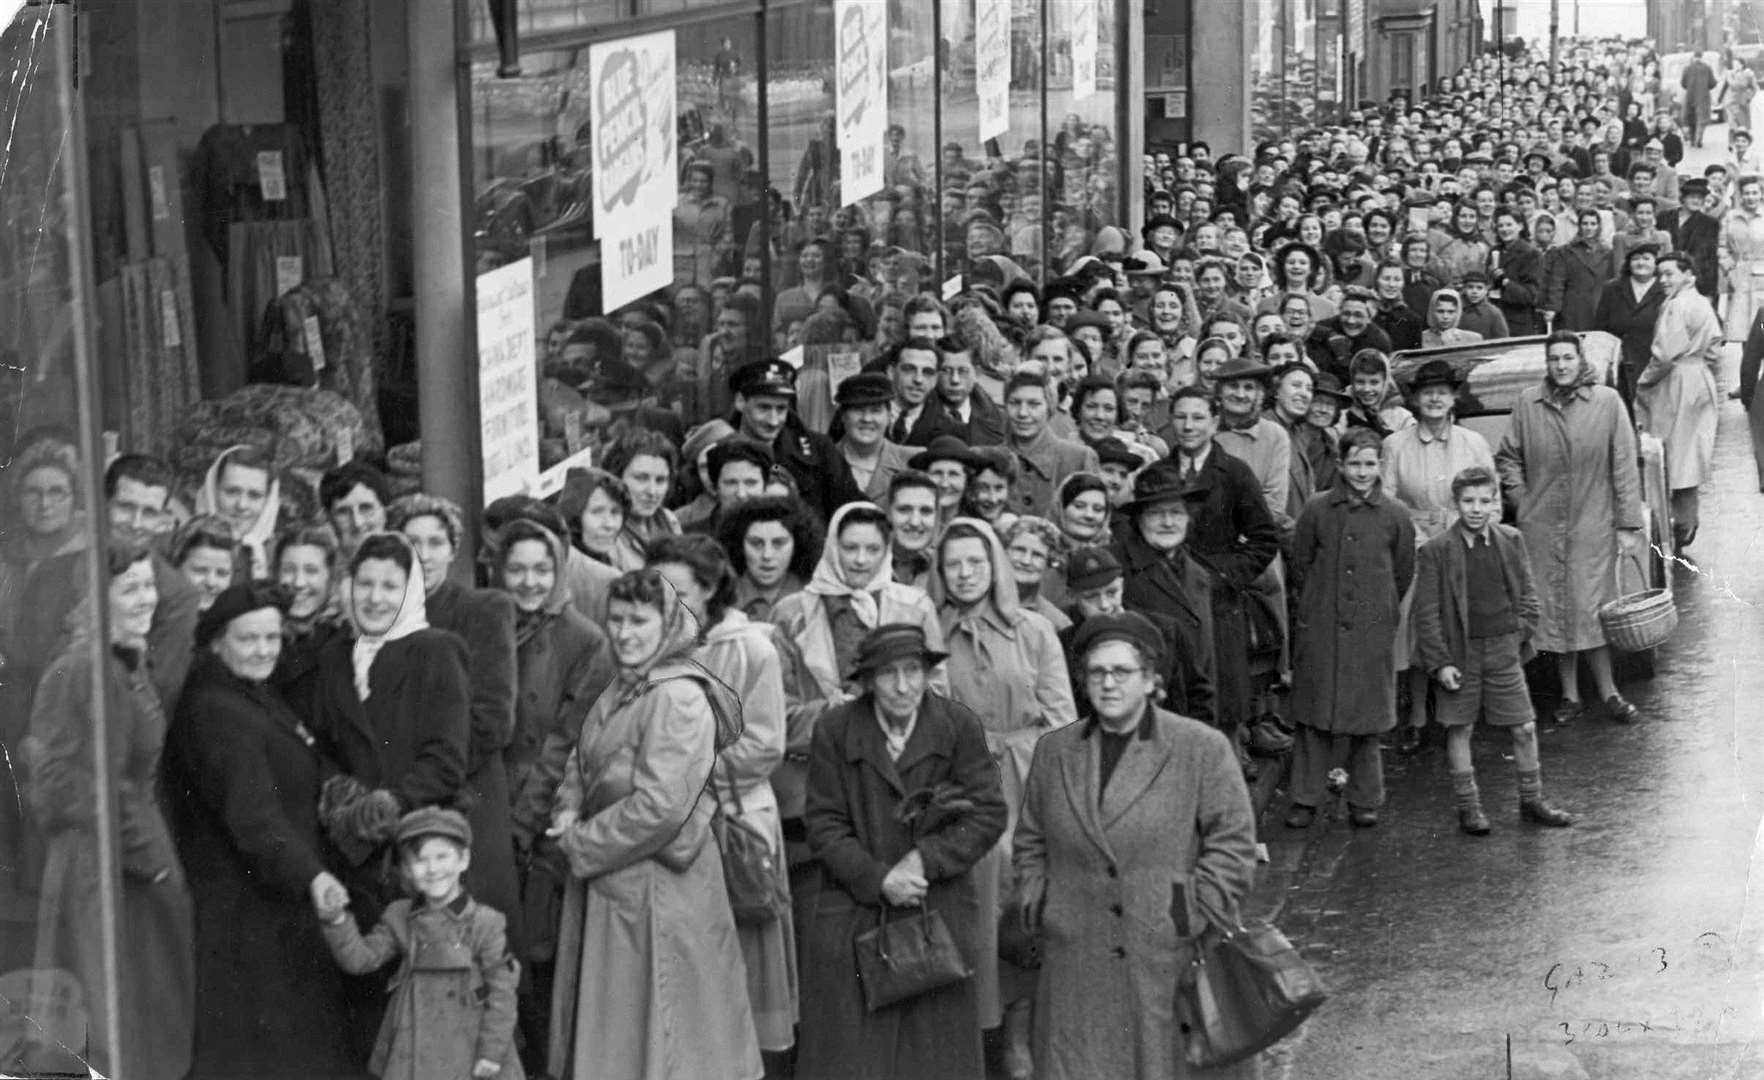 The clothes may look a bit drab, but Britain was beginning to rid itself of post-war austerity. This was the queue for a sale at Dunnings the drapers in Maidstone in February 1950